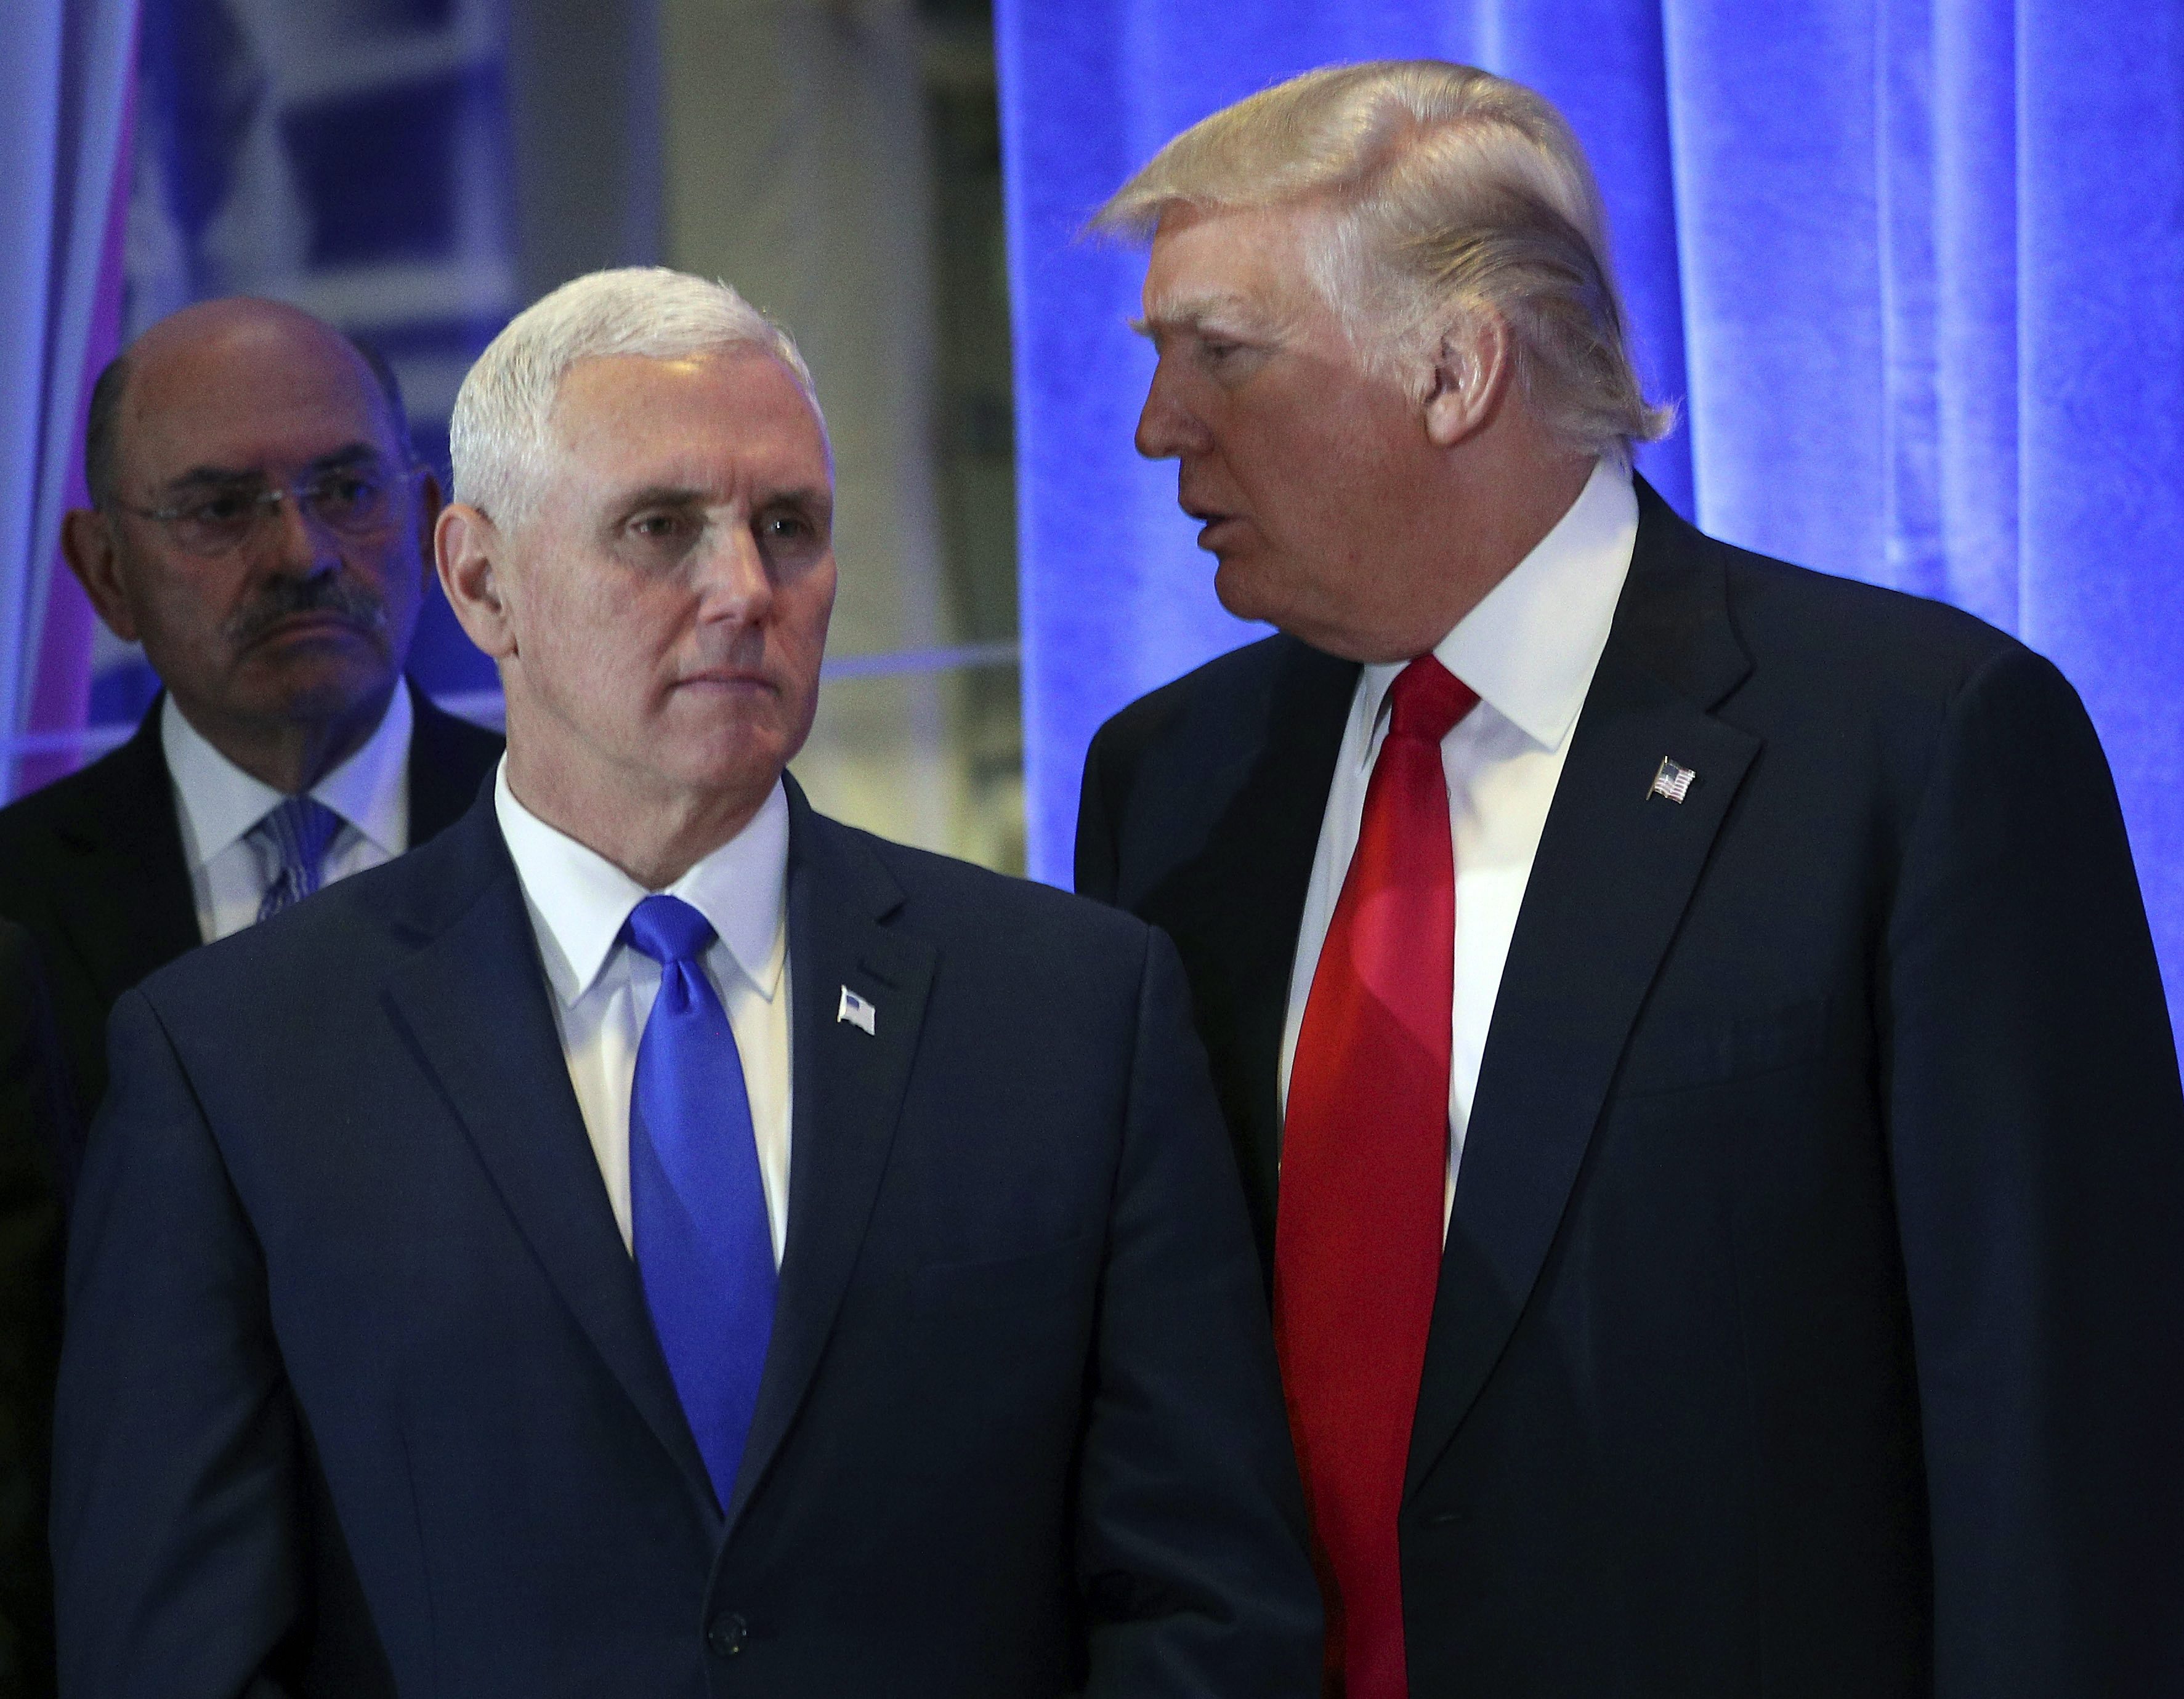 Donald Trump, Mike Pence, America First, impeachment